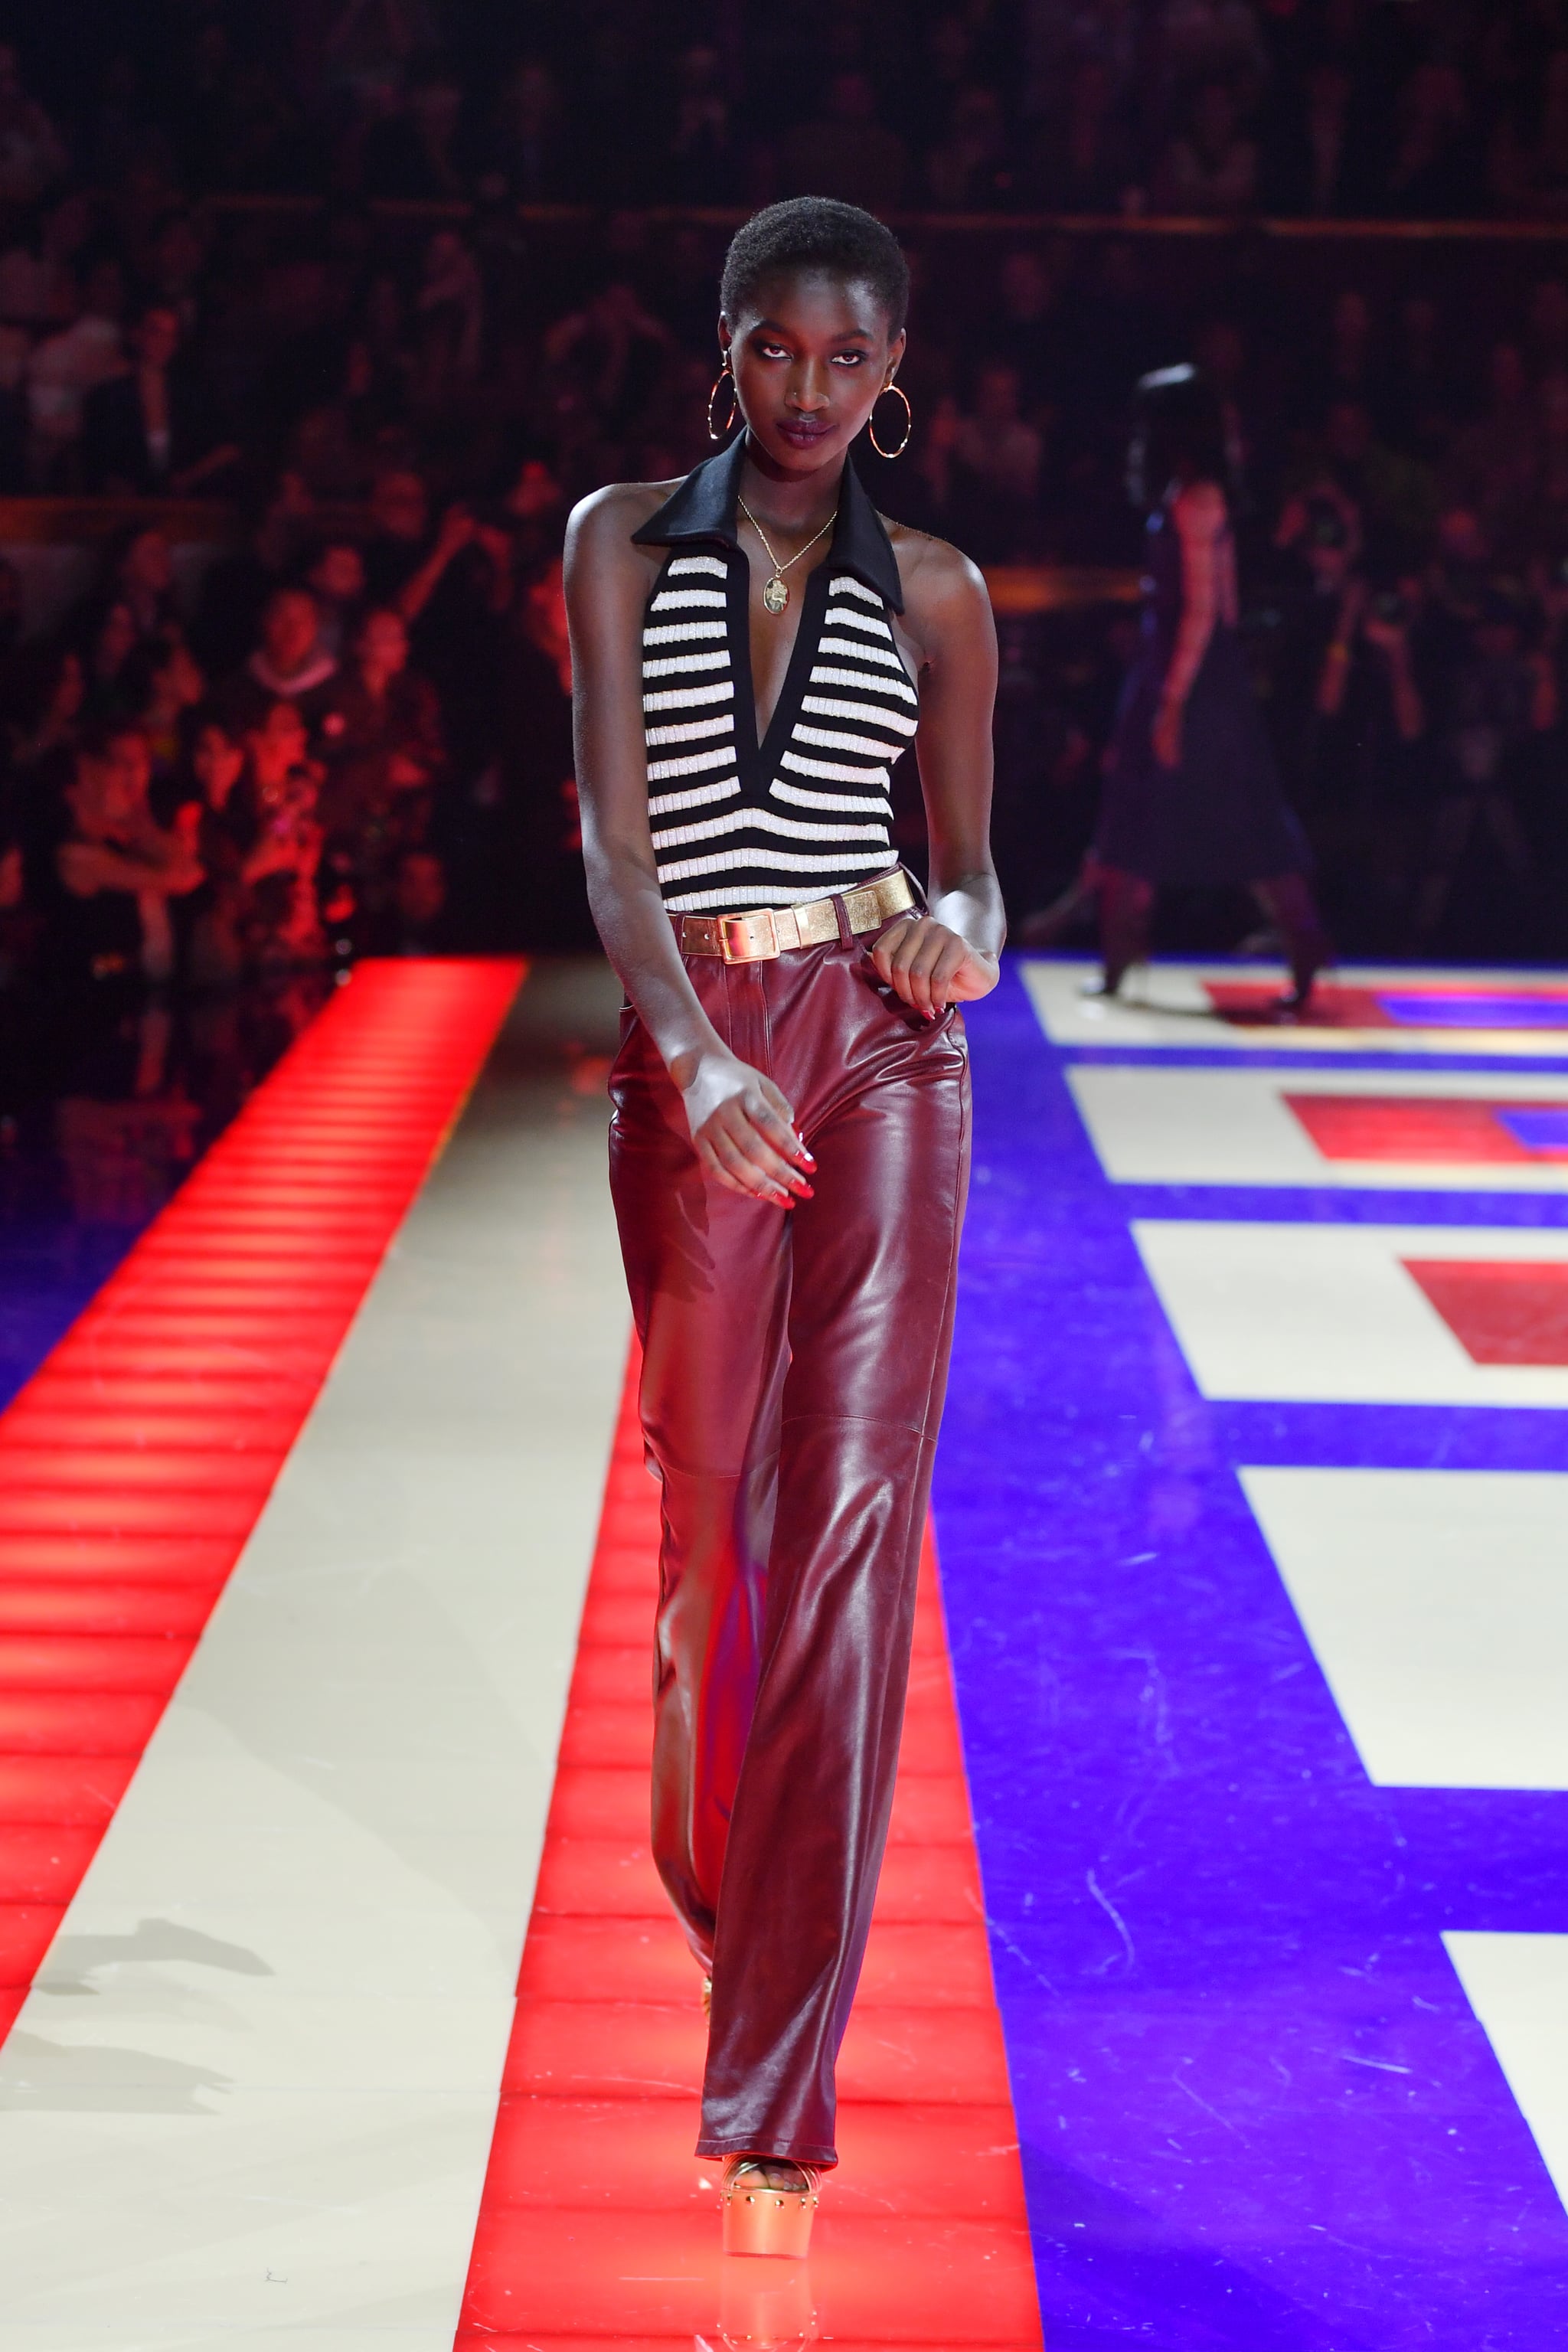 Zendaya's Tommy Hilfiger Collection Is Extremely 1970s